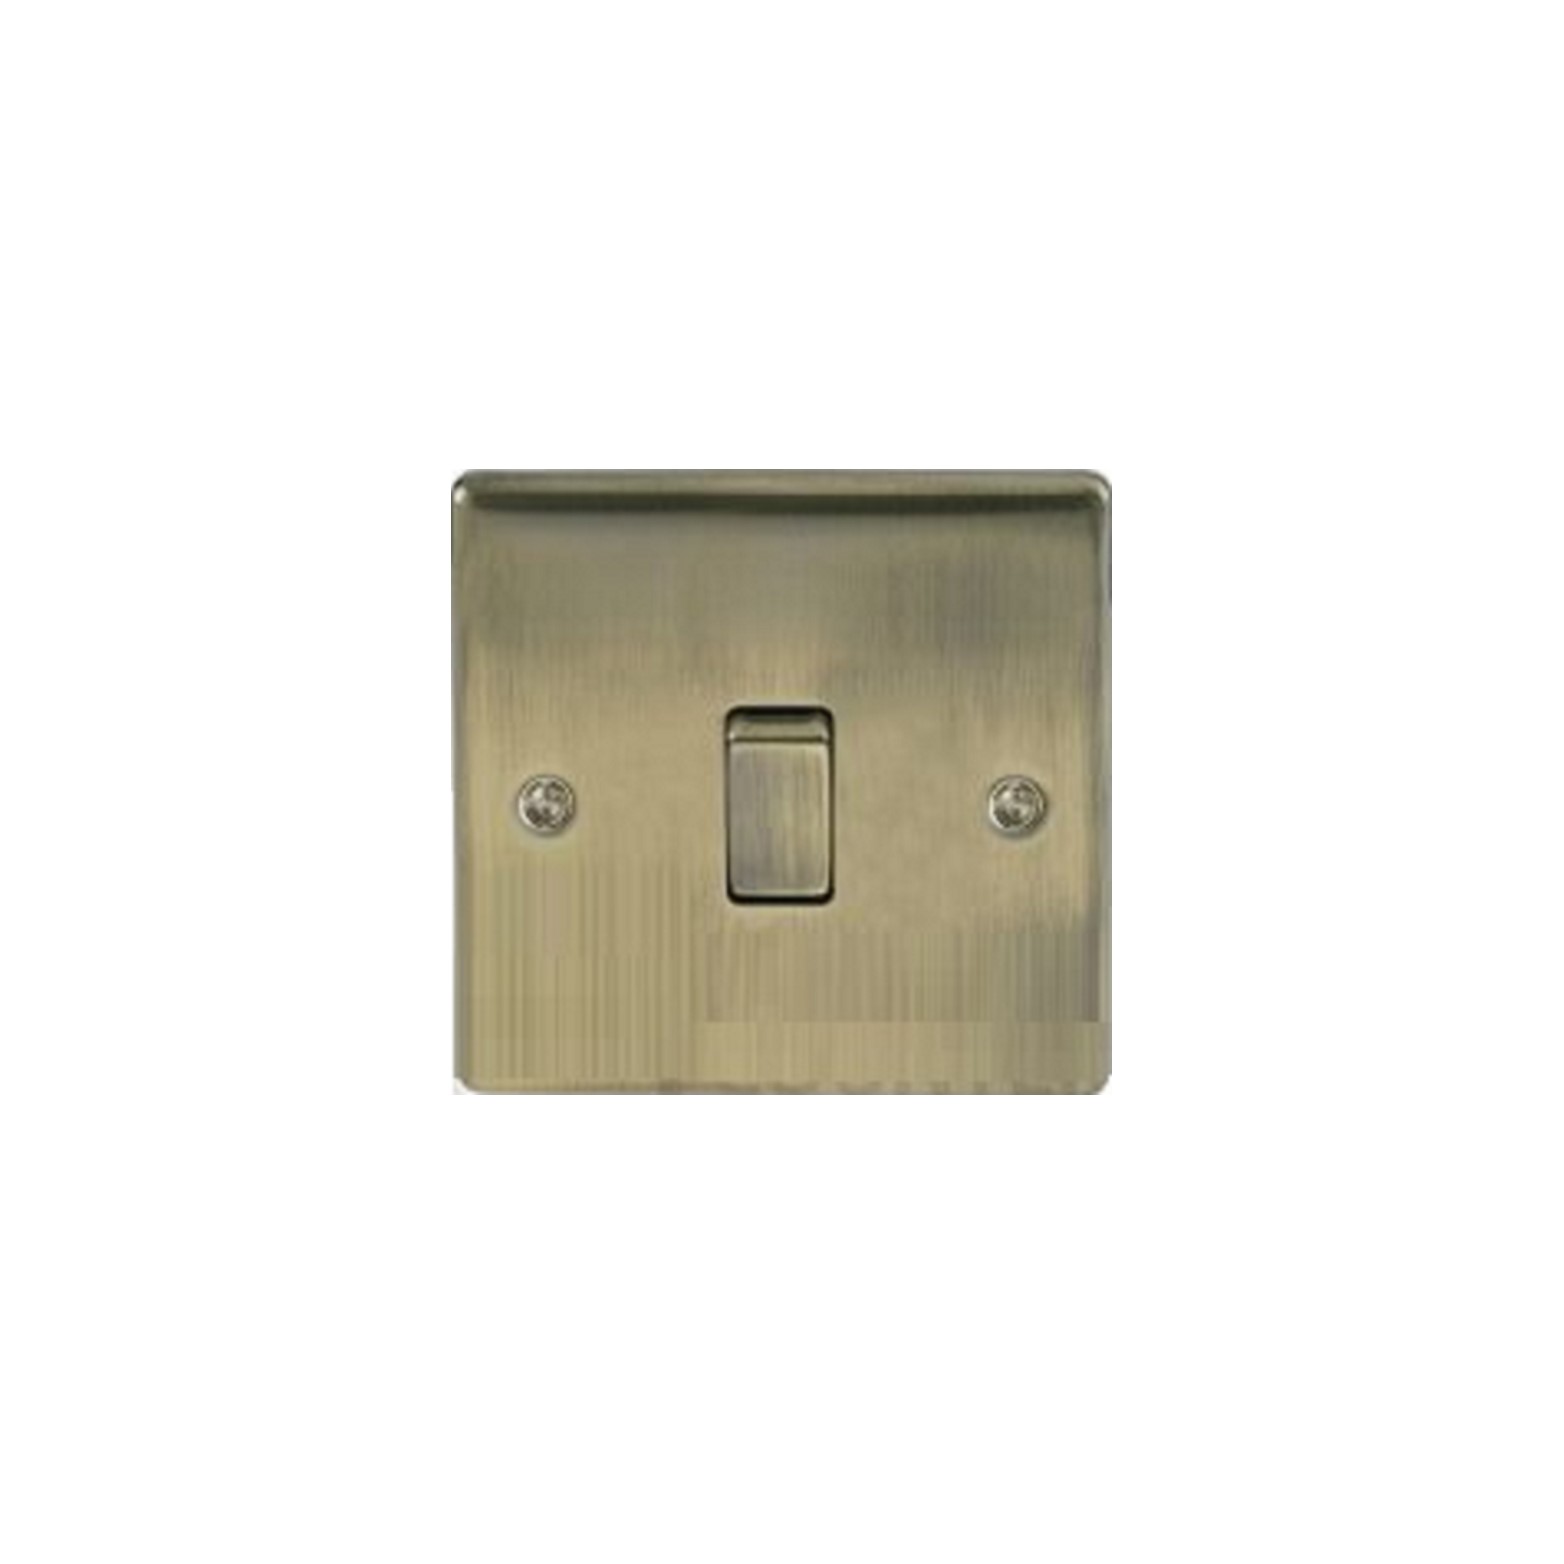 Nexus Antique Brass 1-Gang 2Way 10AX Switch, single screwless clip-on front plate curved (NAB12)